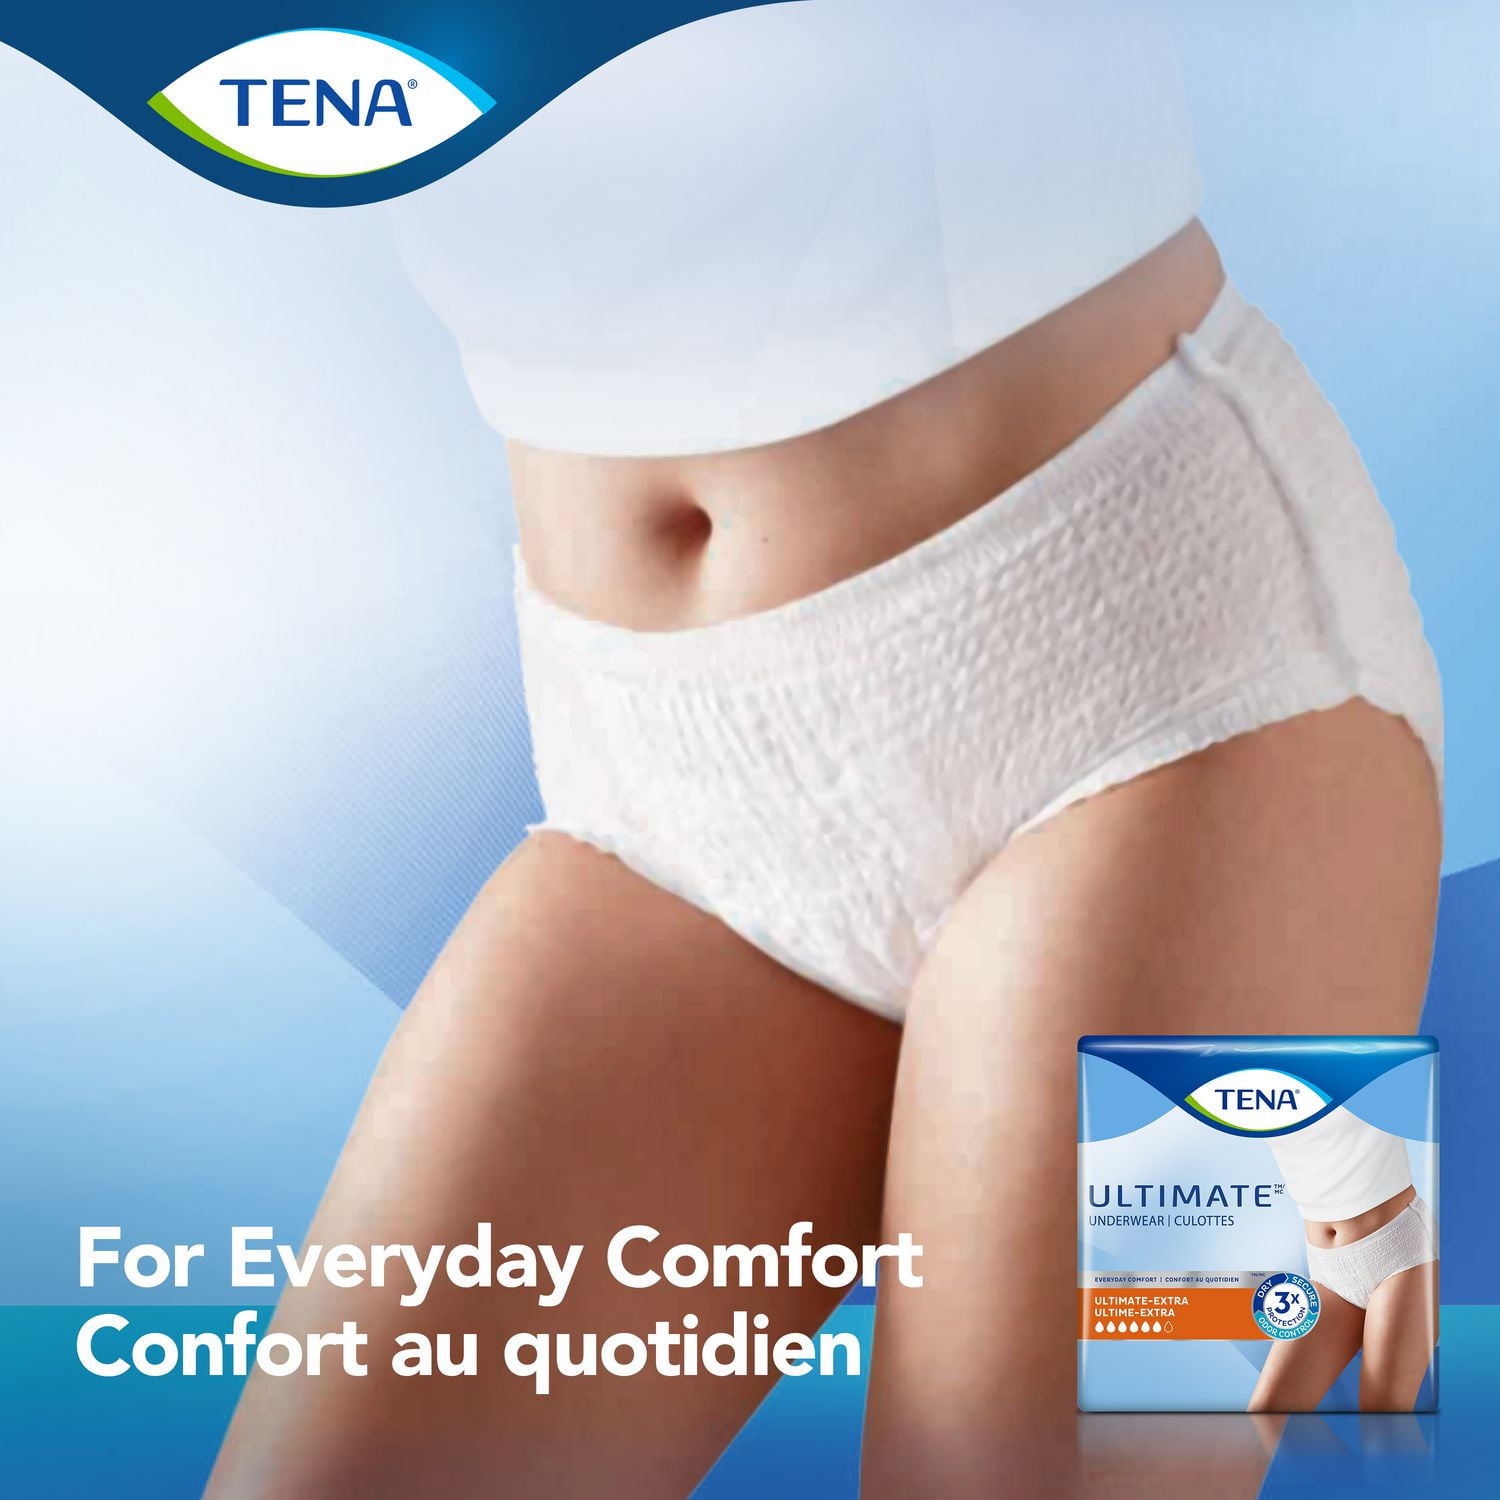 TENA Protective Incontinence Underwear, Ultimate Absorbency Extra